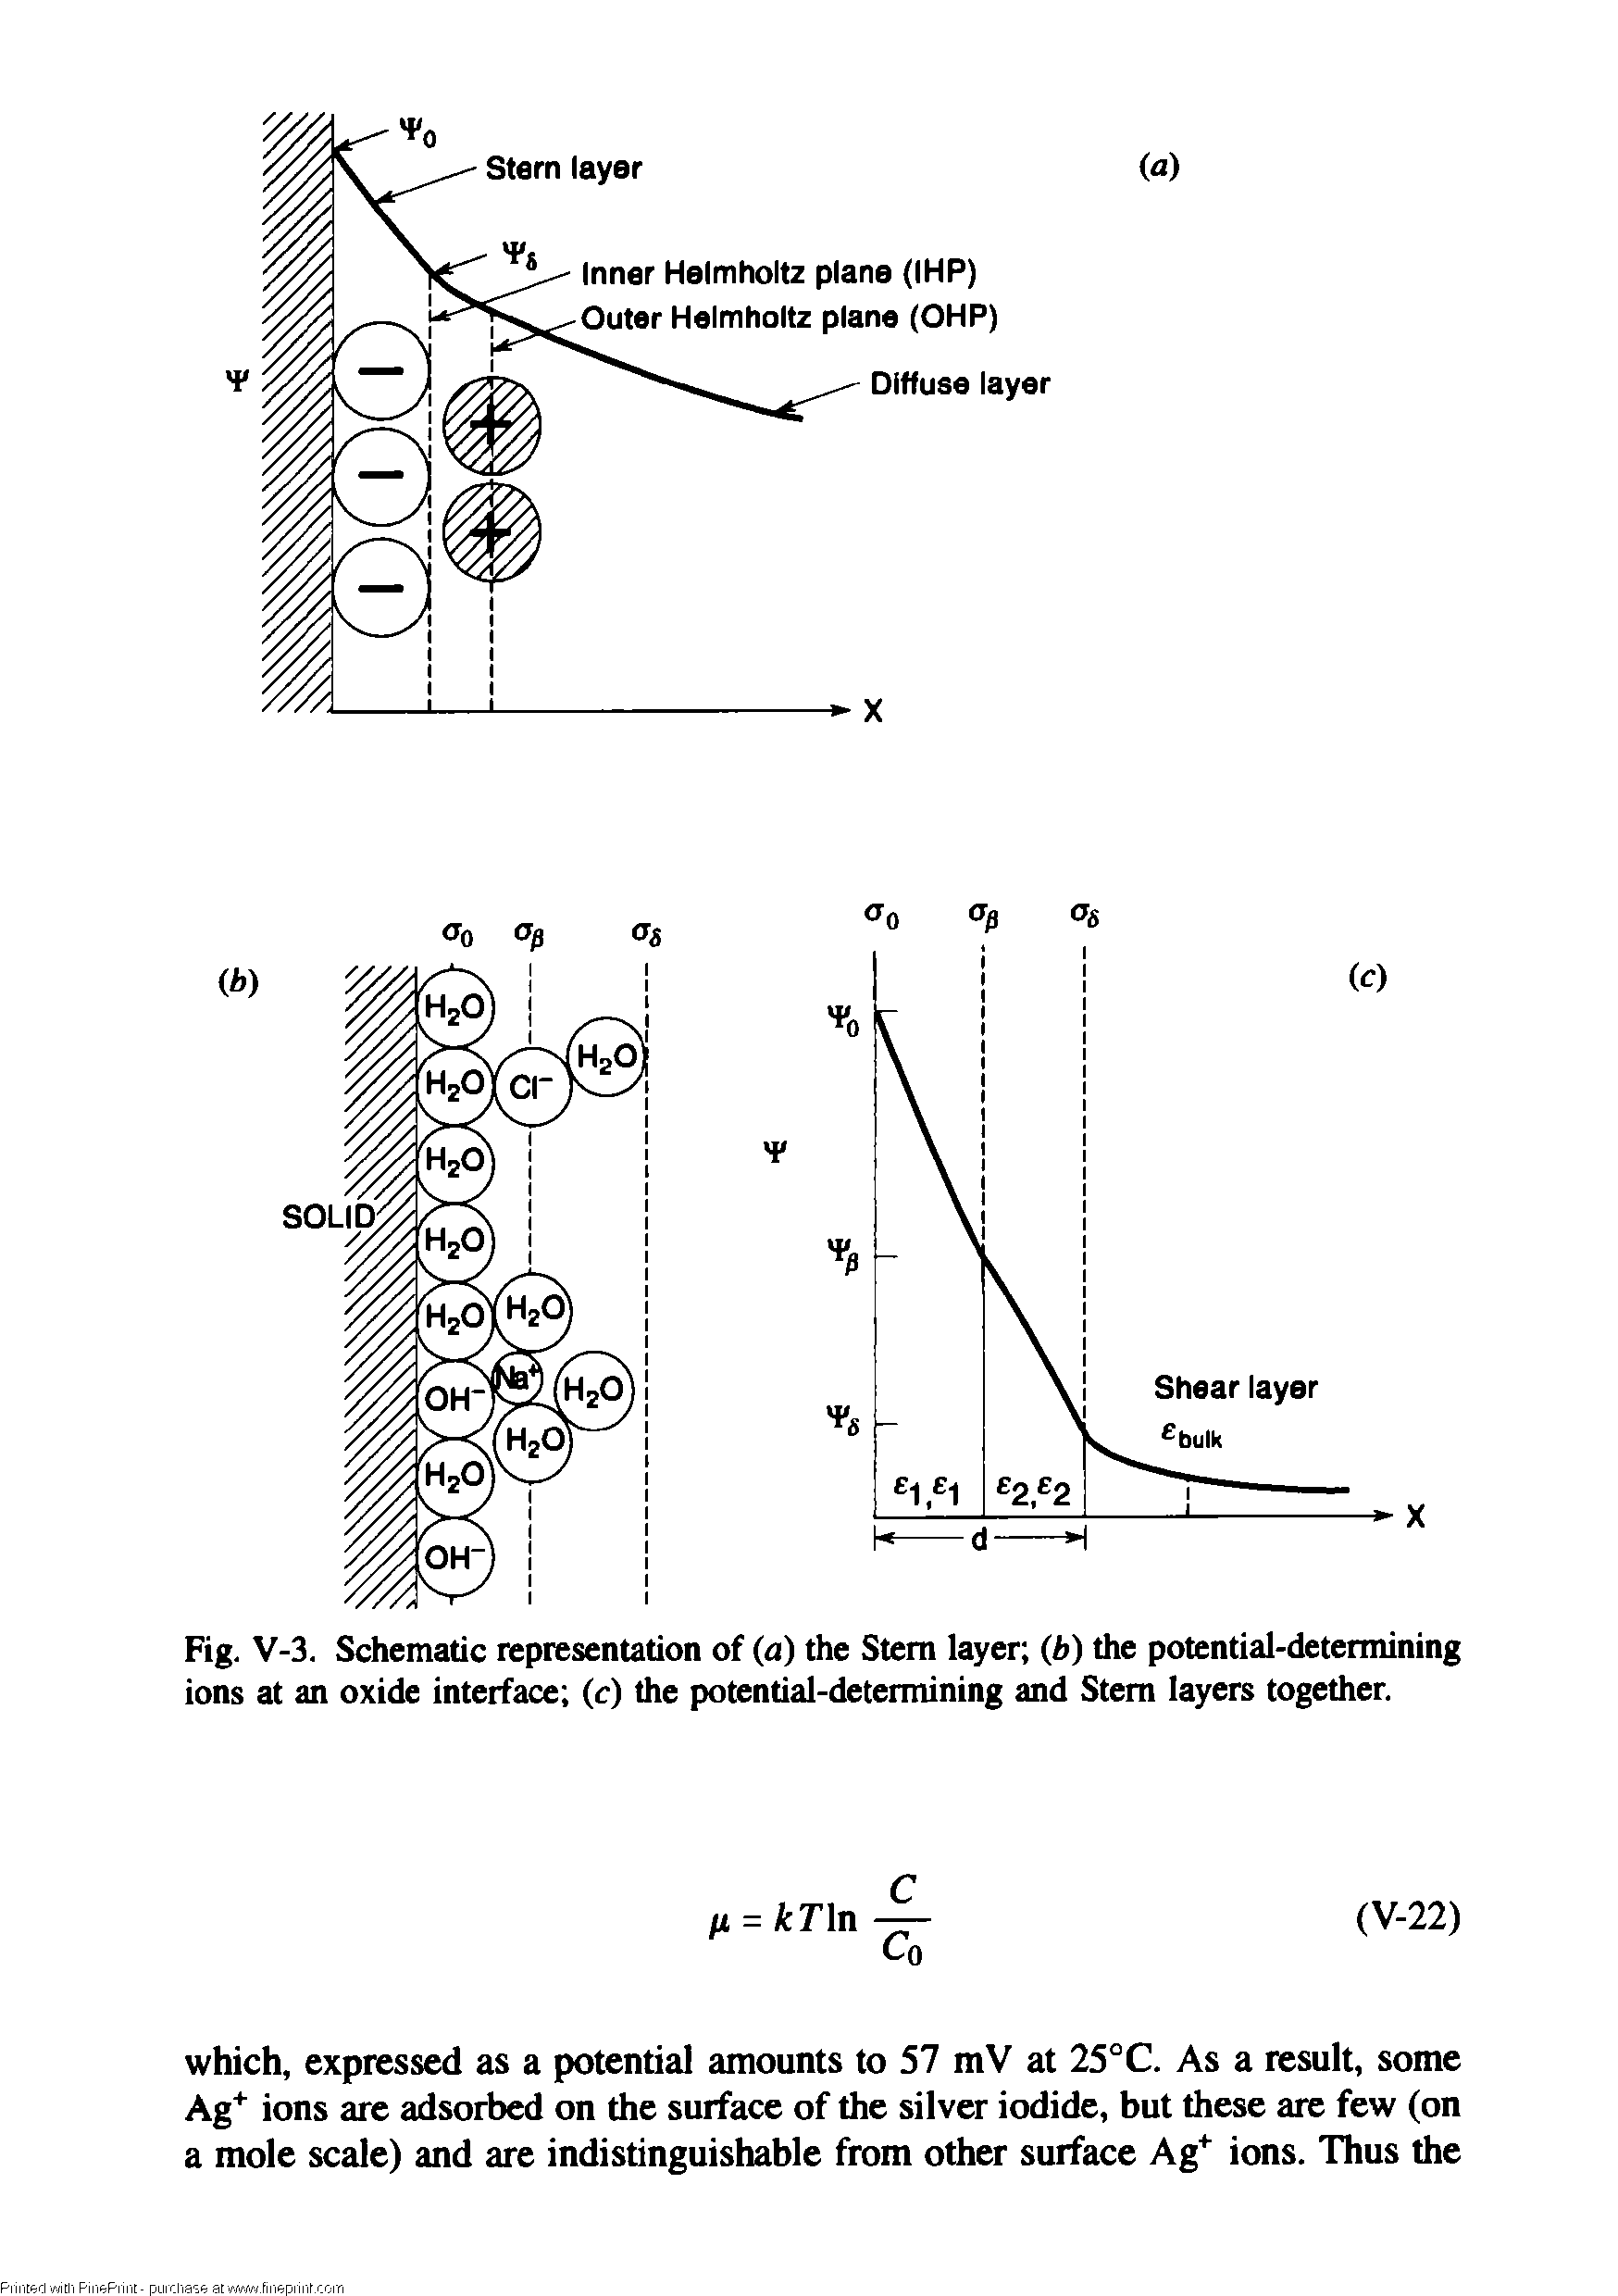 Fig. V-3. Schematic representation of (a) the Stem layer (b) the potential-determining ions at an oxide interface (c) the potential-determining and Stem layers together.